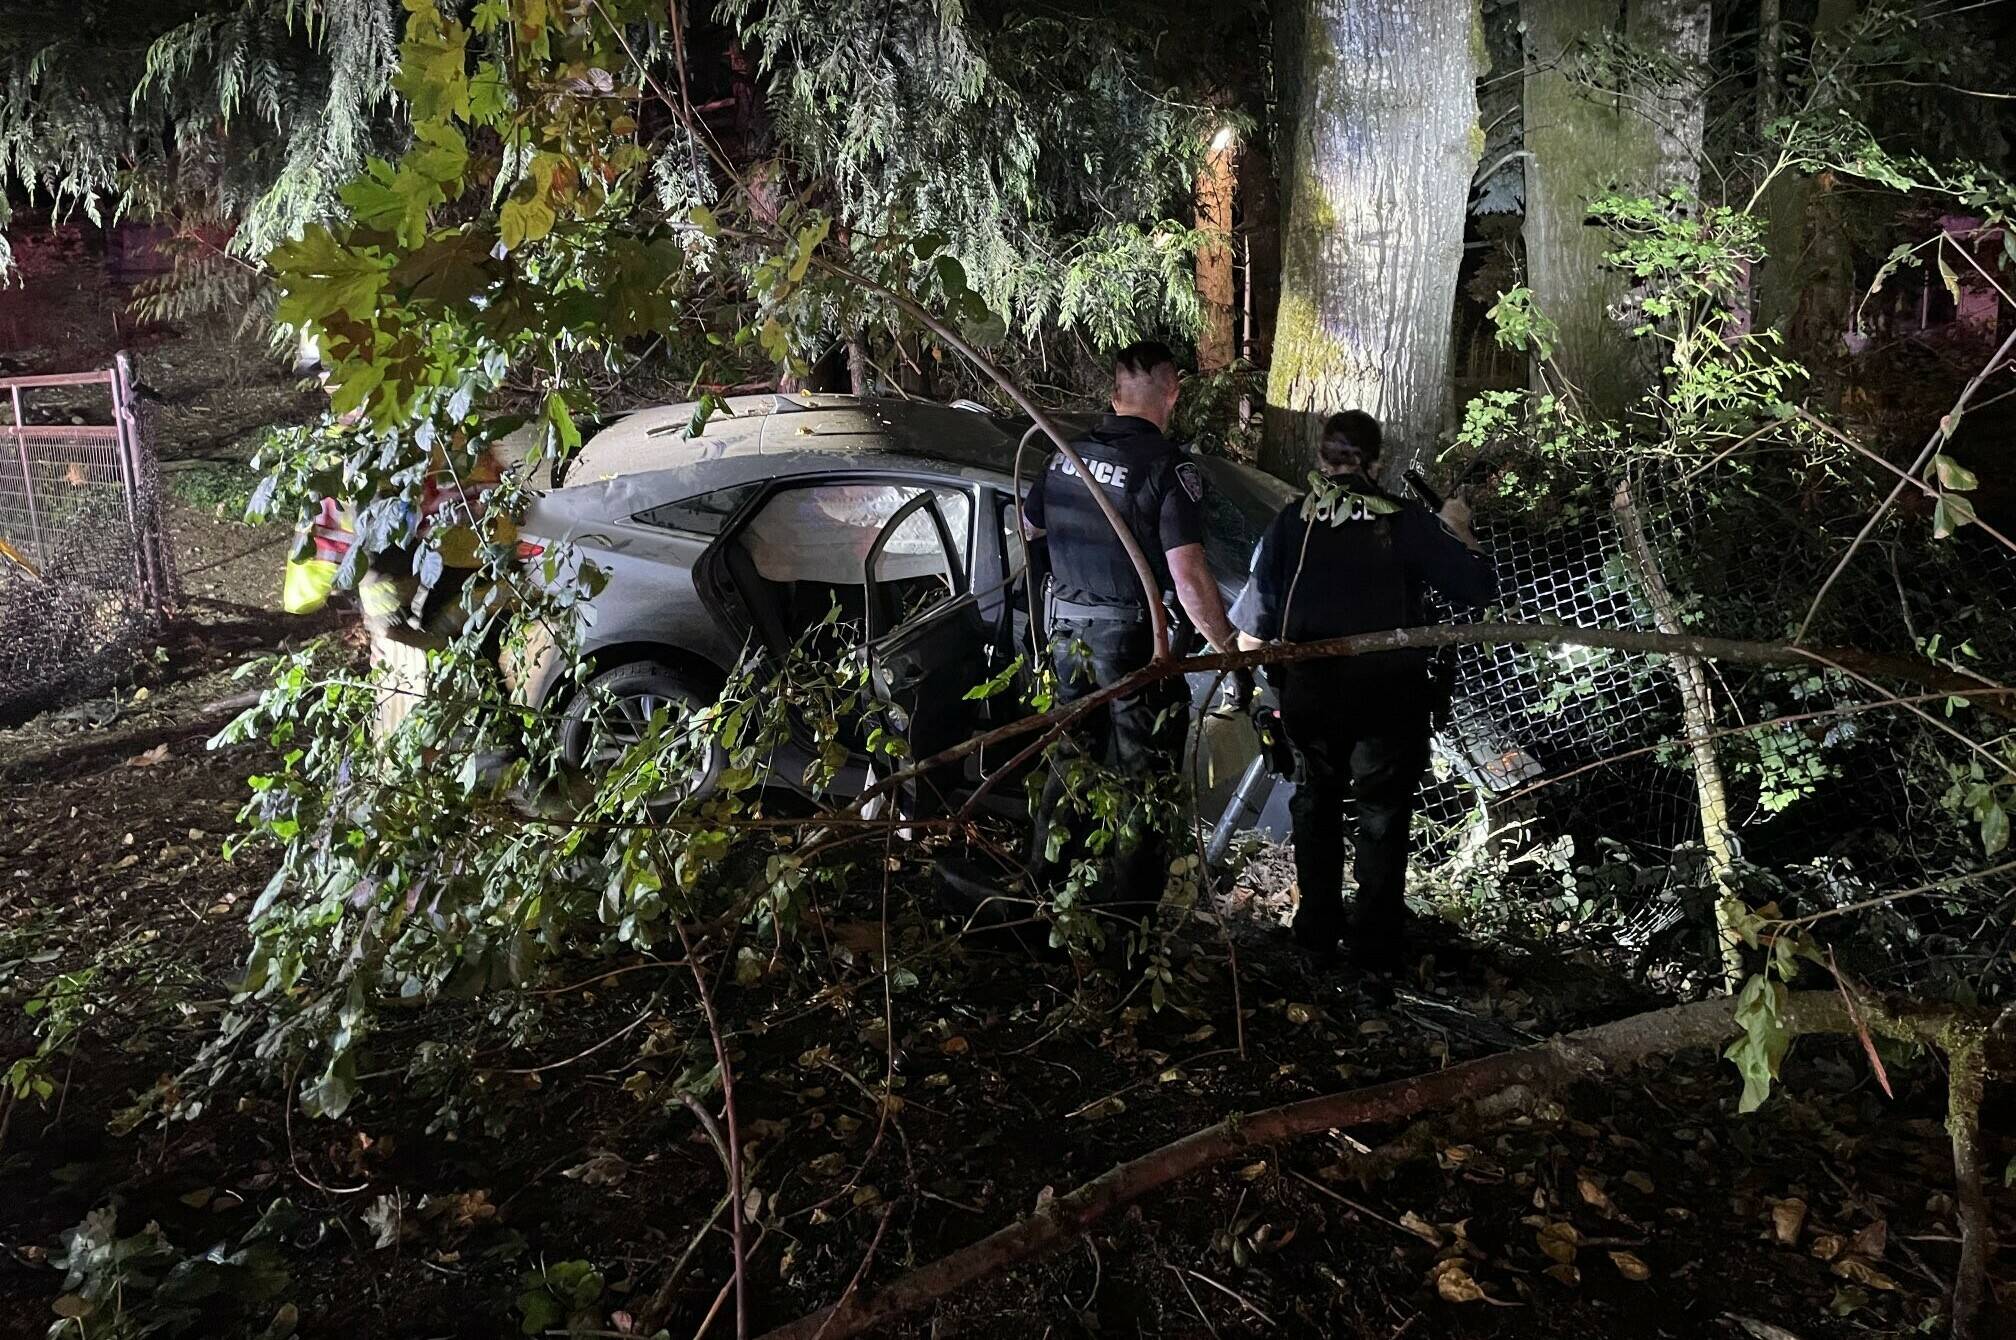 A Silver Hyundai was allegedly carjacked out of Maple Valley by three teenagers, who crashed it later in the night in Black Diamond, killing one of the occupants. Photo courtesy Puget Sound Fire